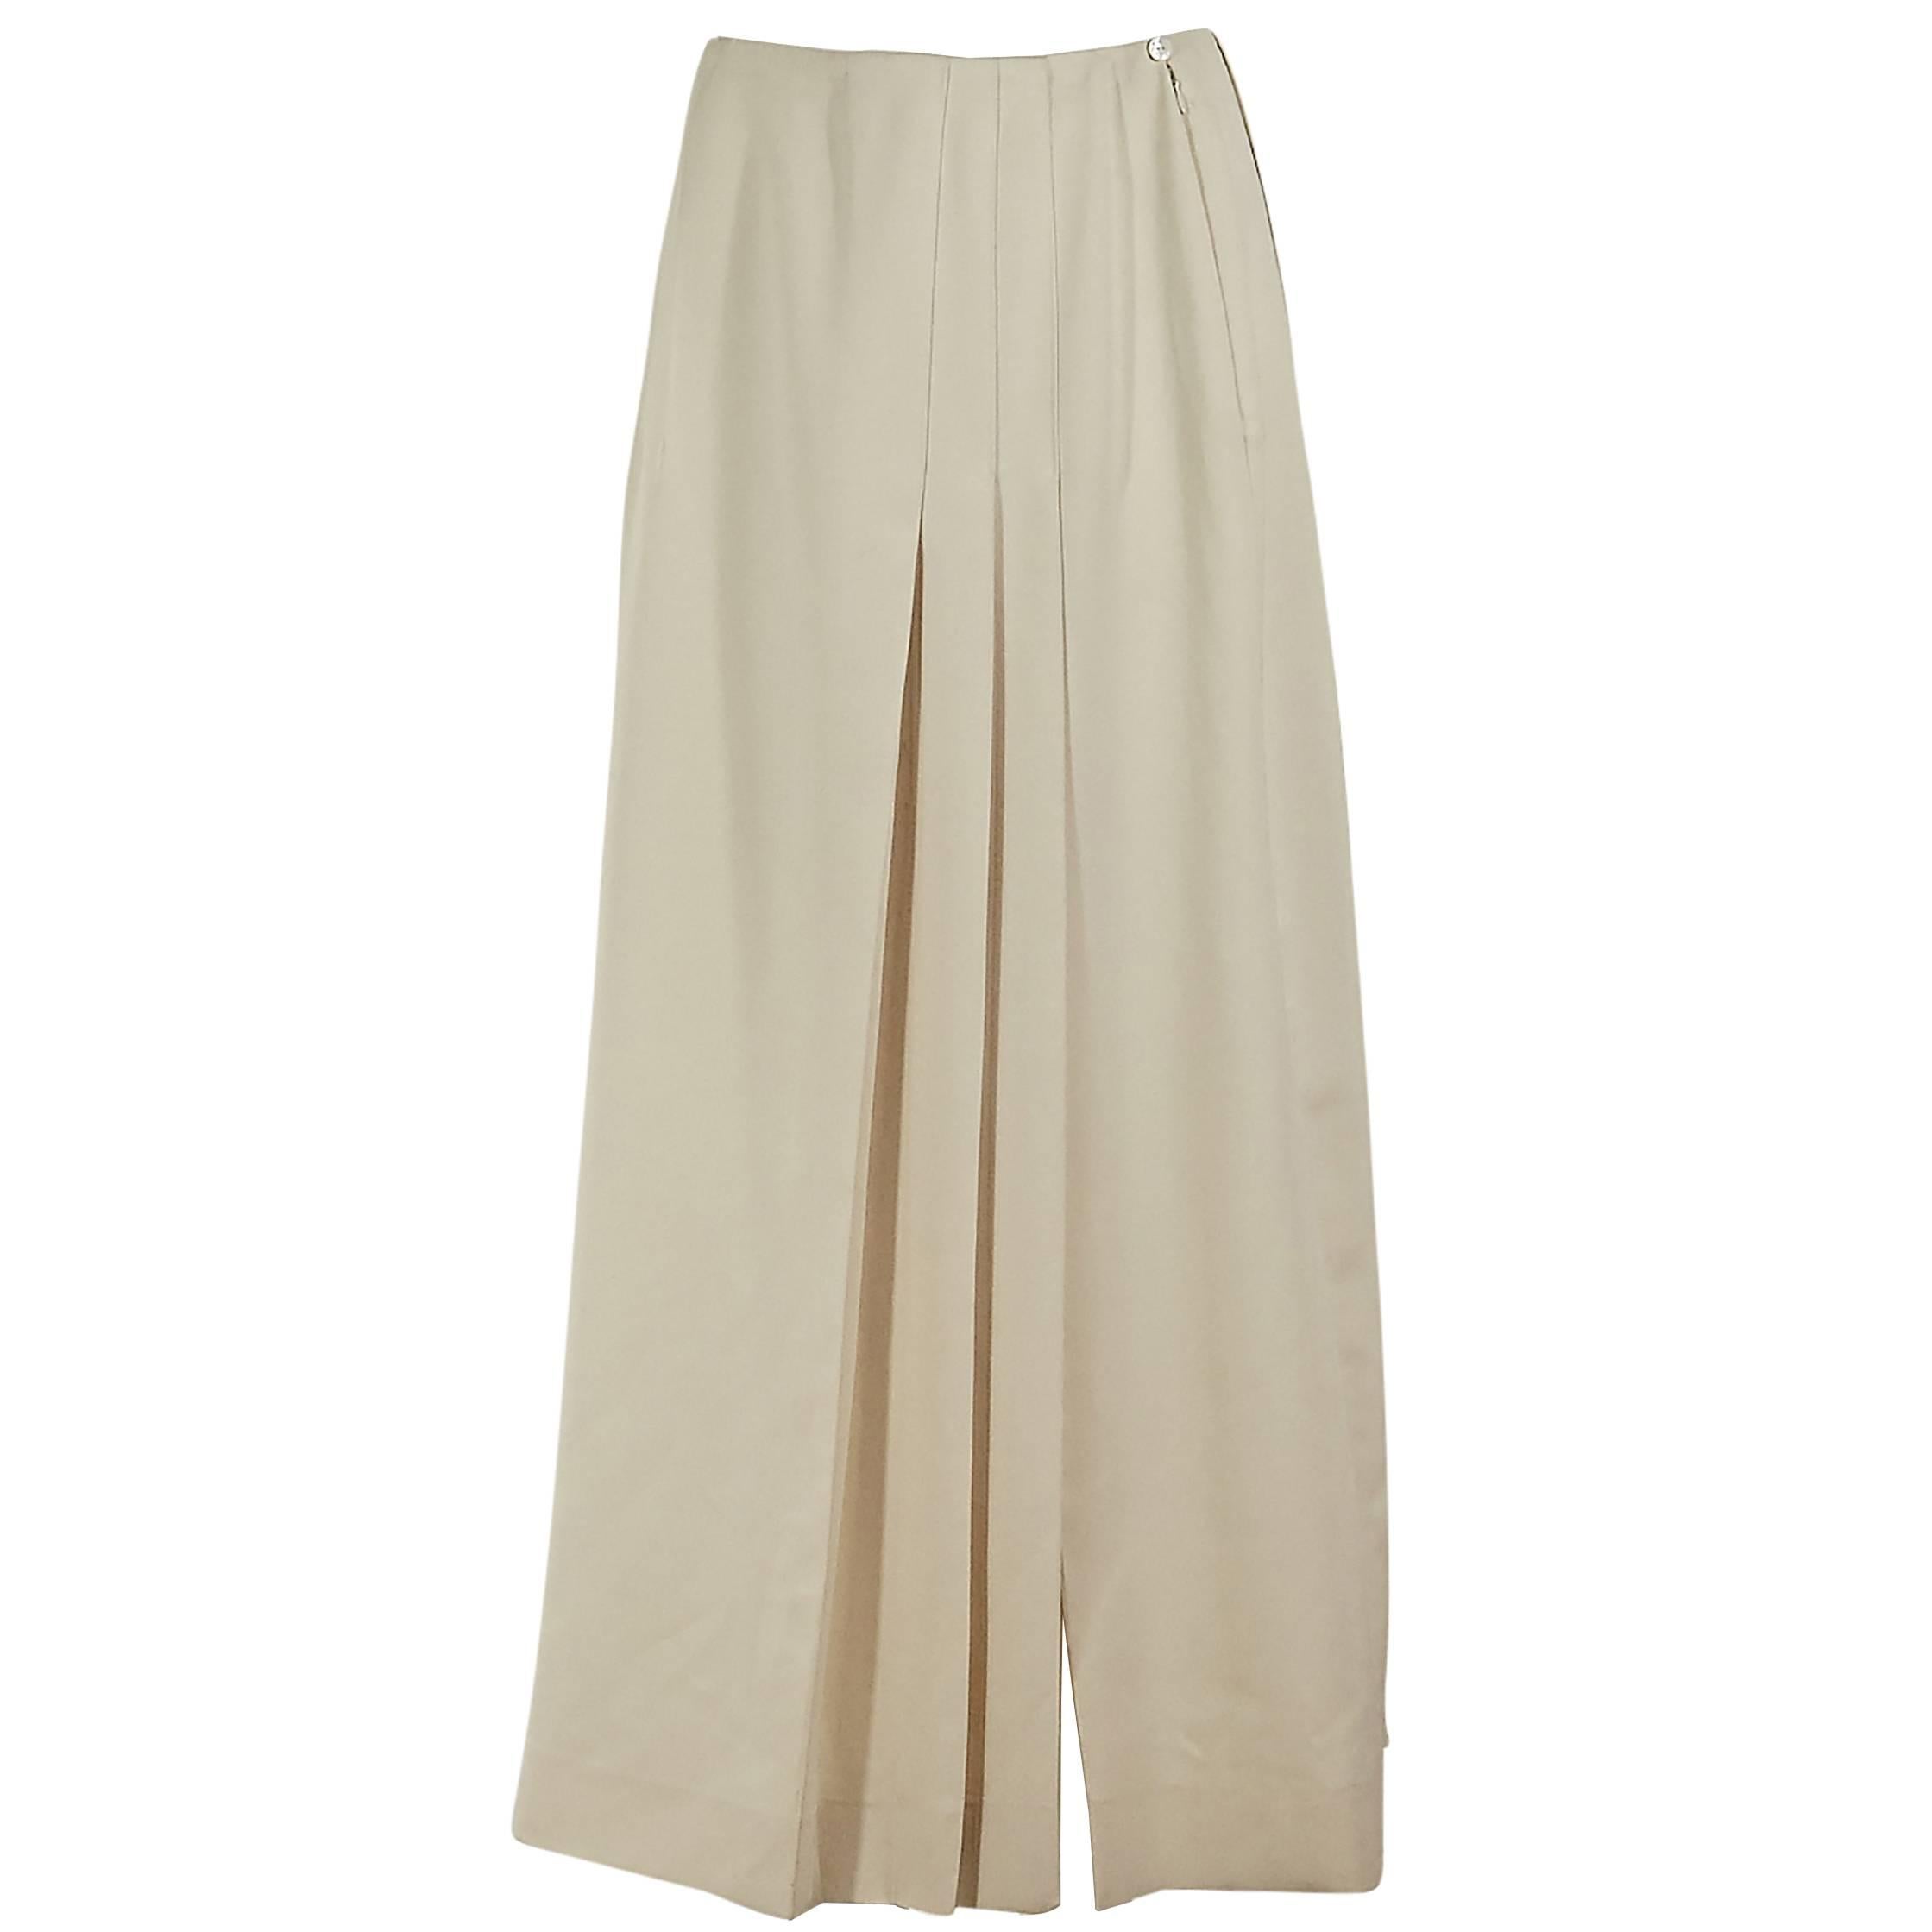 Ivory Chanel Diagonal Pleated Skirt